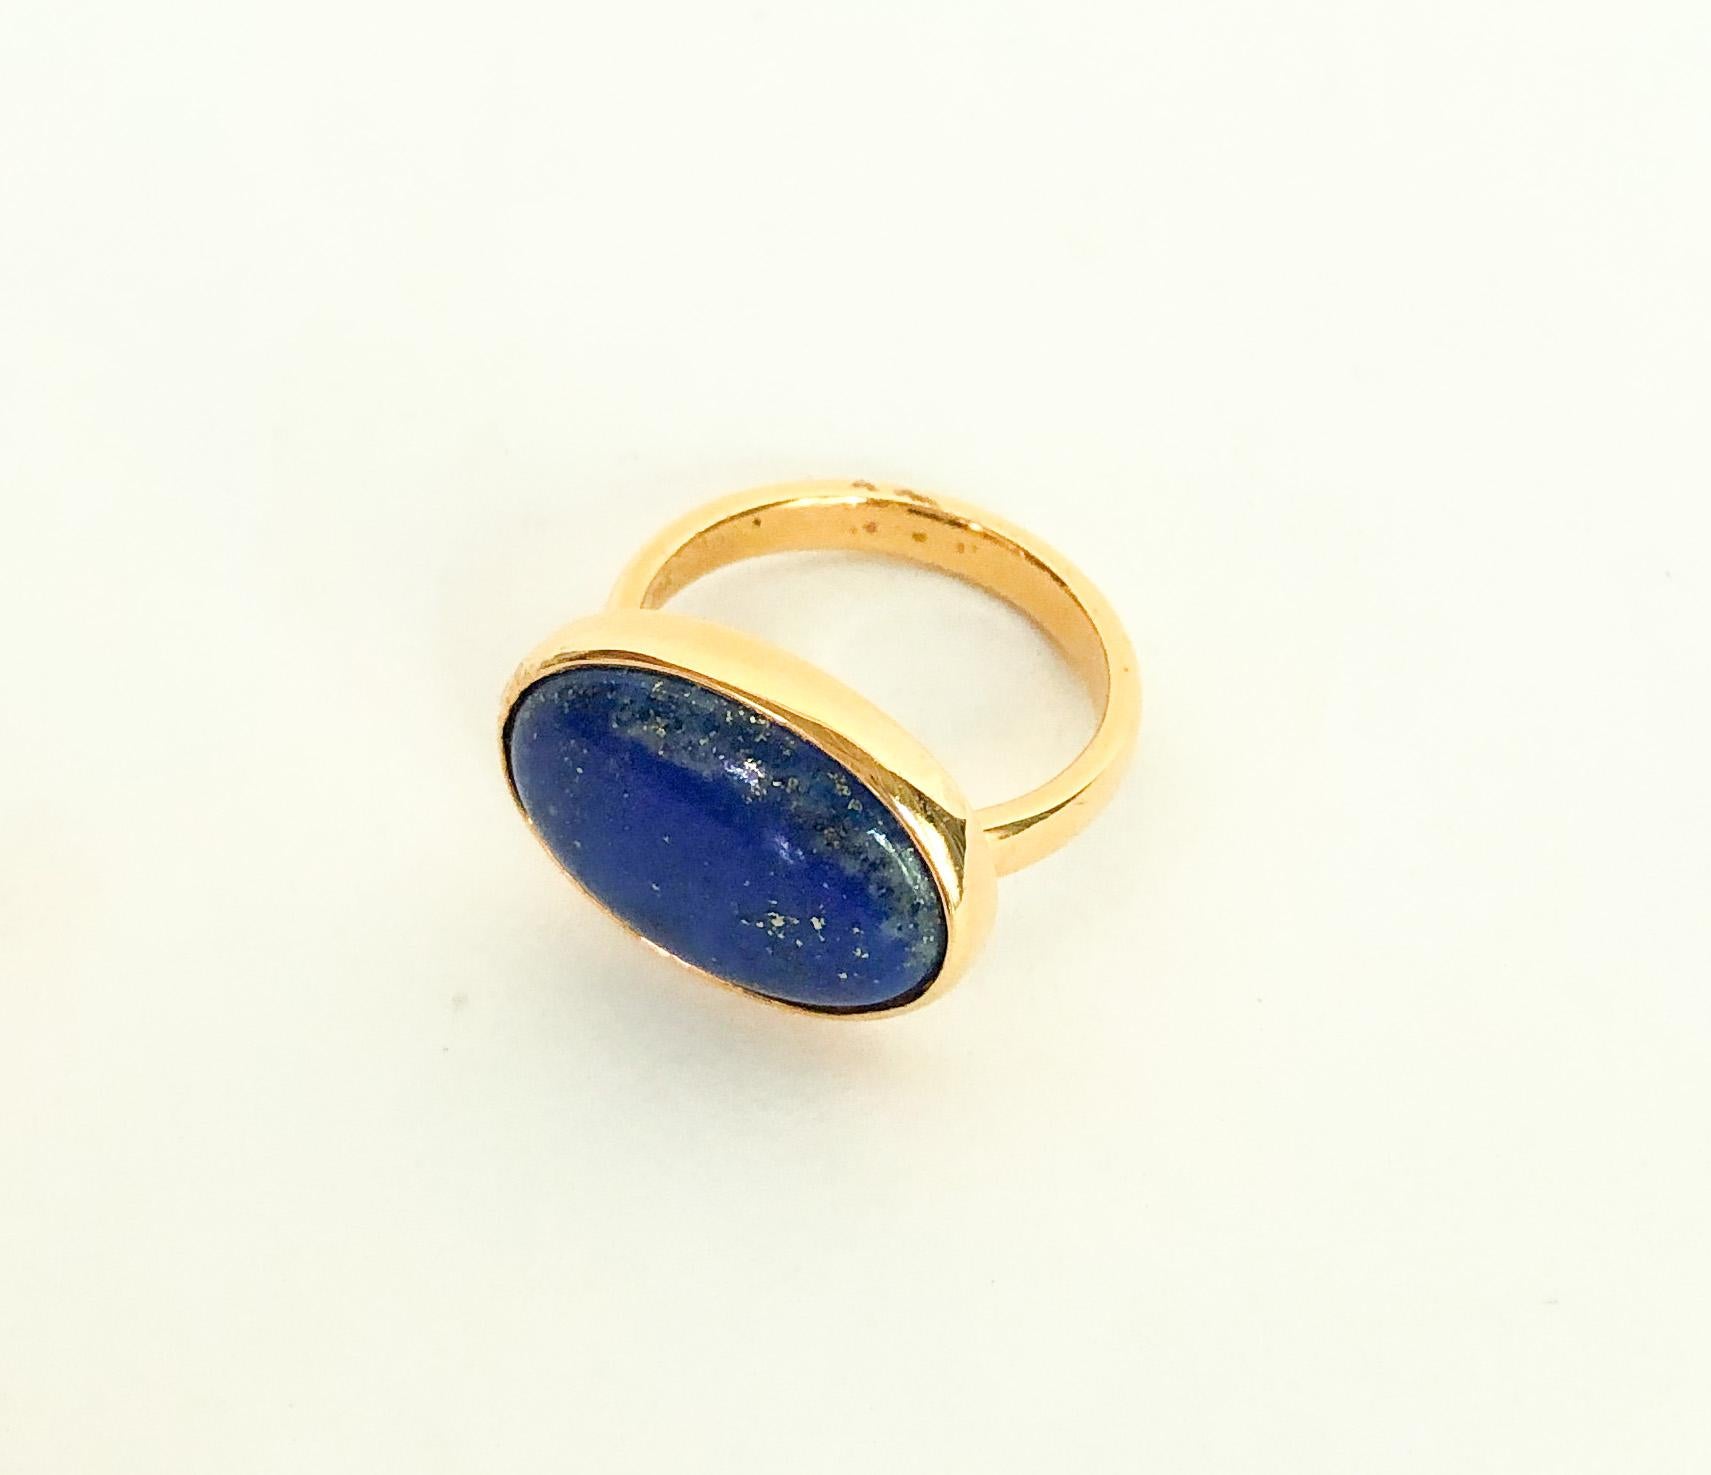 Beautiful ring by Marina J. This ring features a domed Lapis Lazuli stone perfectly bezel set in solid 14k Yellow Gold (weighing roughly 4.5 grams of solid 14k Gold). The stone's stunning Royal Blue color is perfectly accented by the Gold, giving a